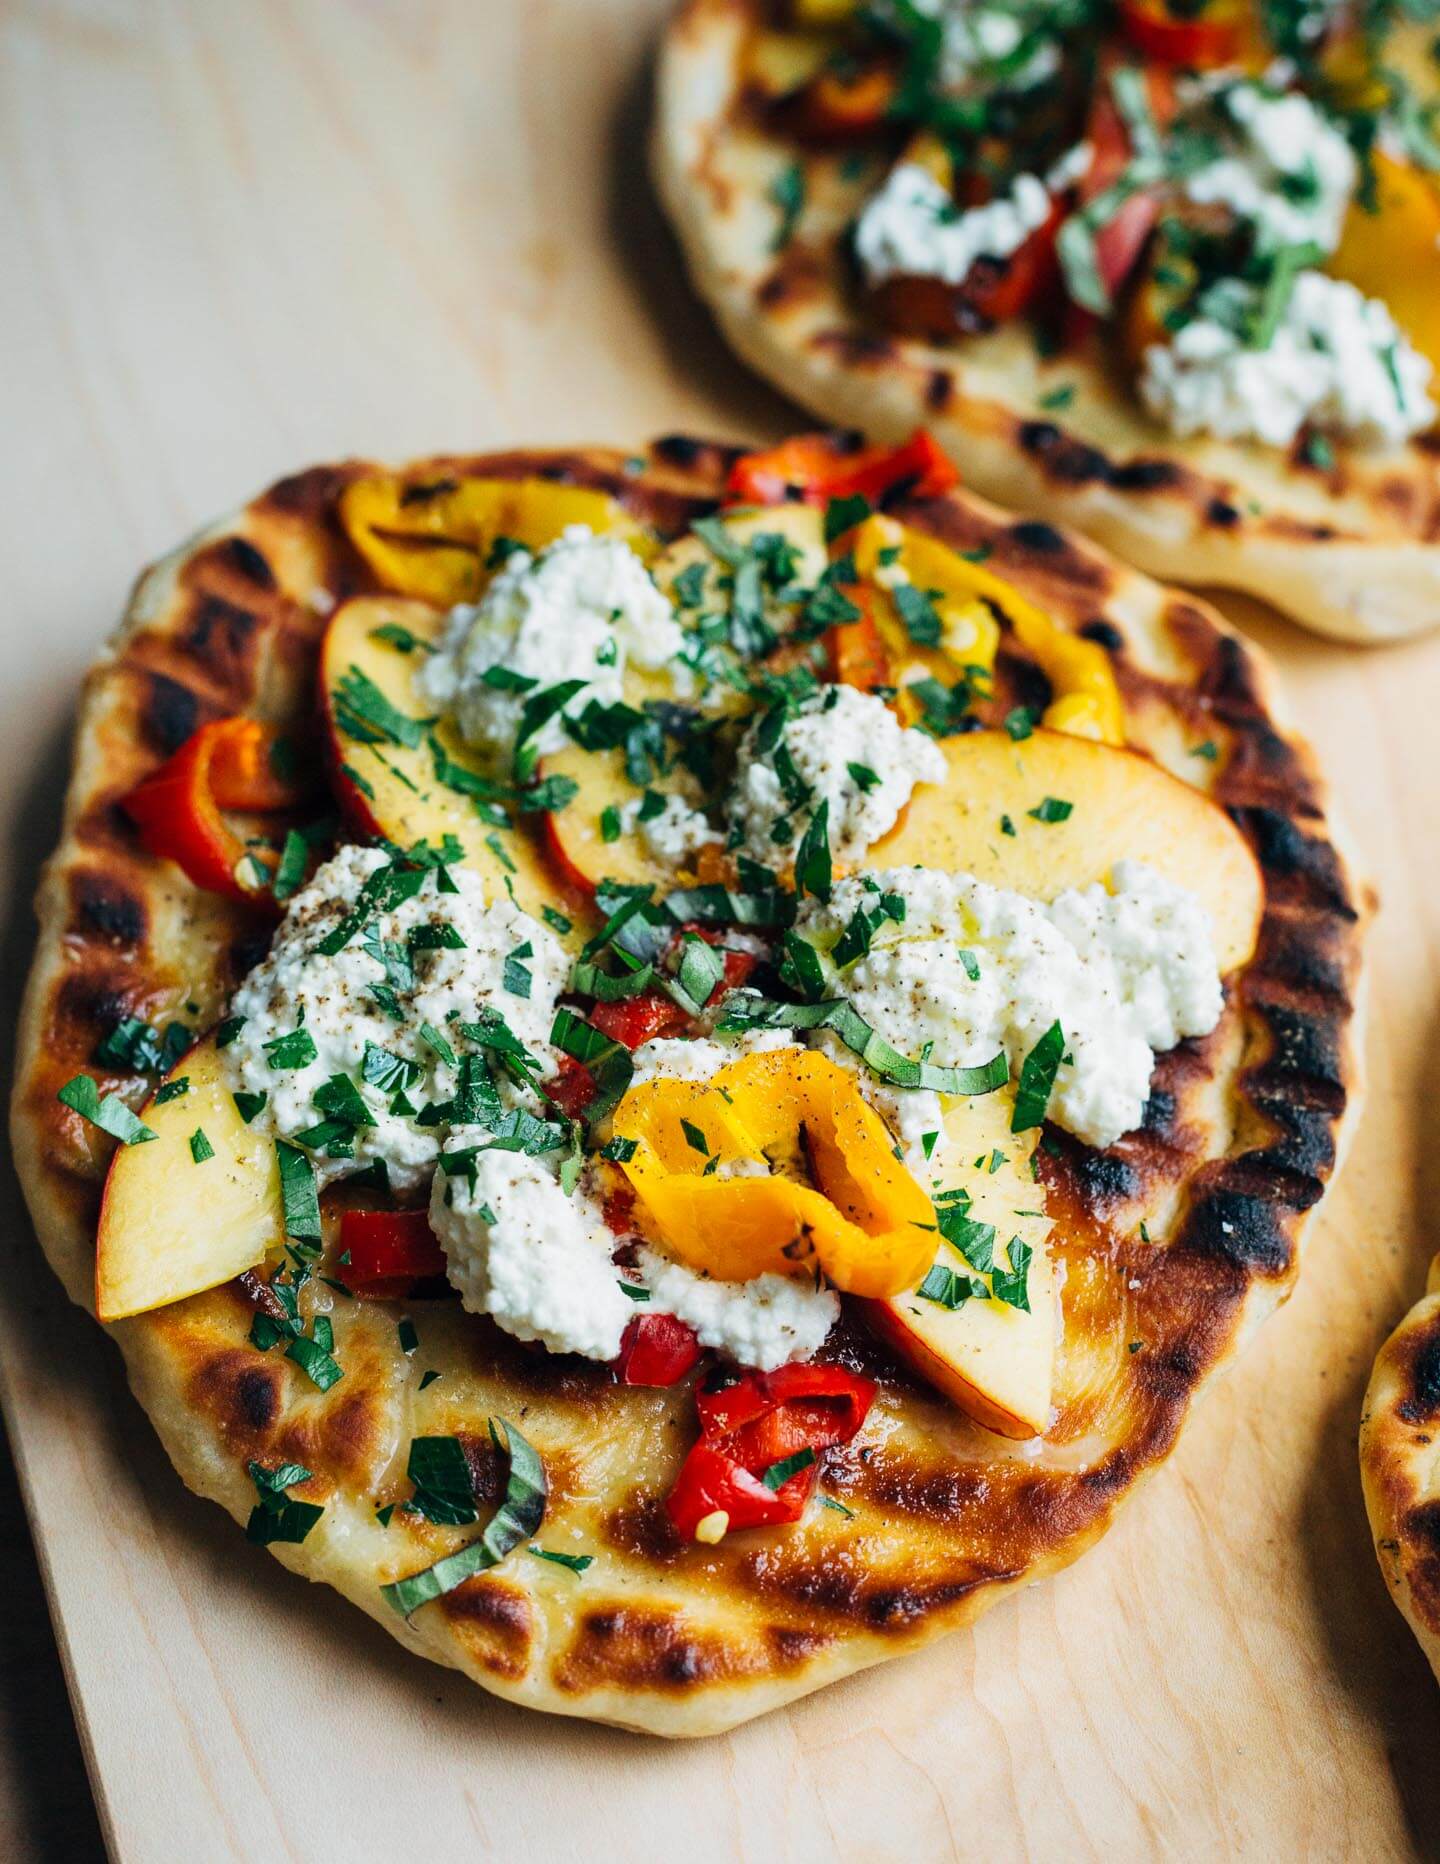 roasted pepper, nectarine and ricotta grilled pizzas // brooklyn supper